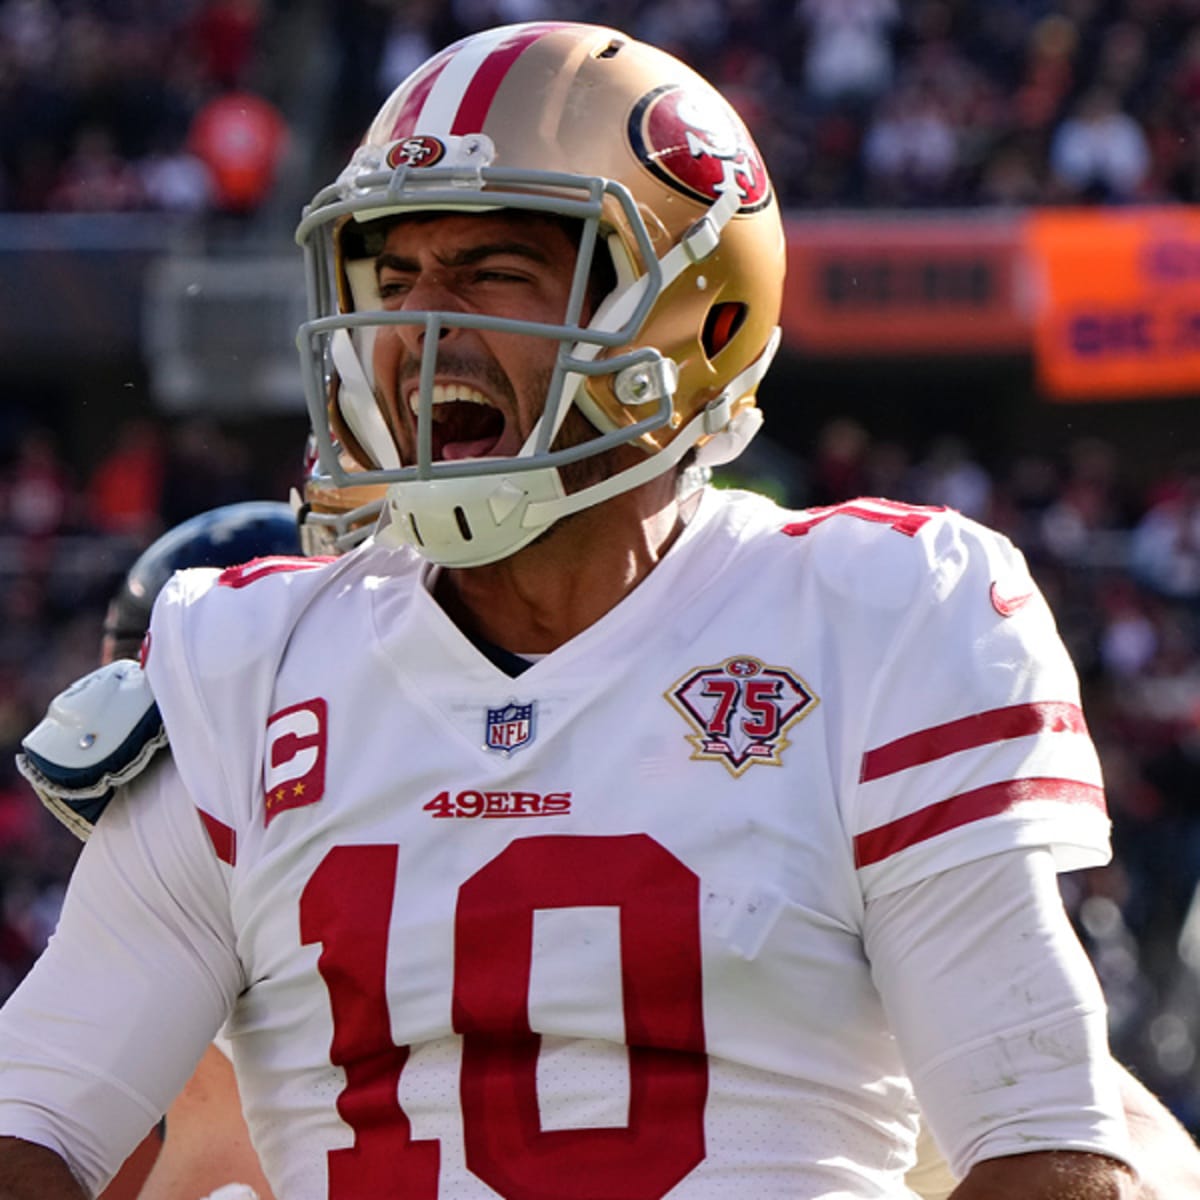 49ers vs. Rams Game Preview